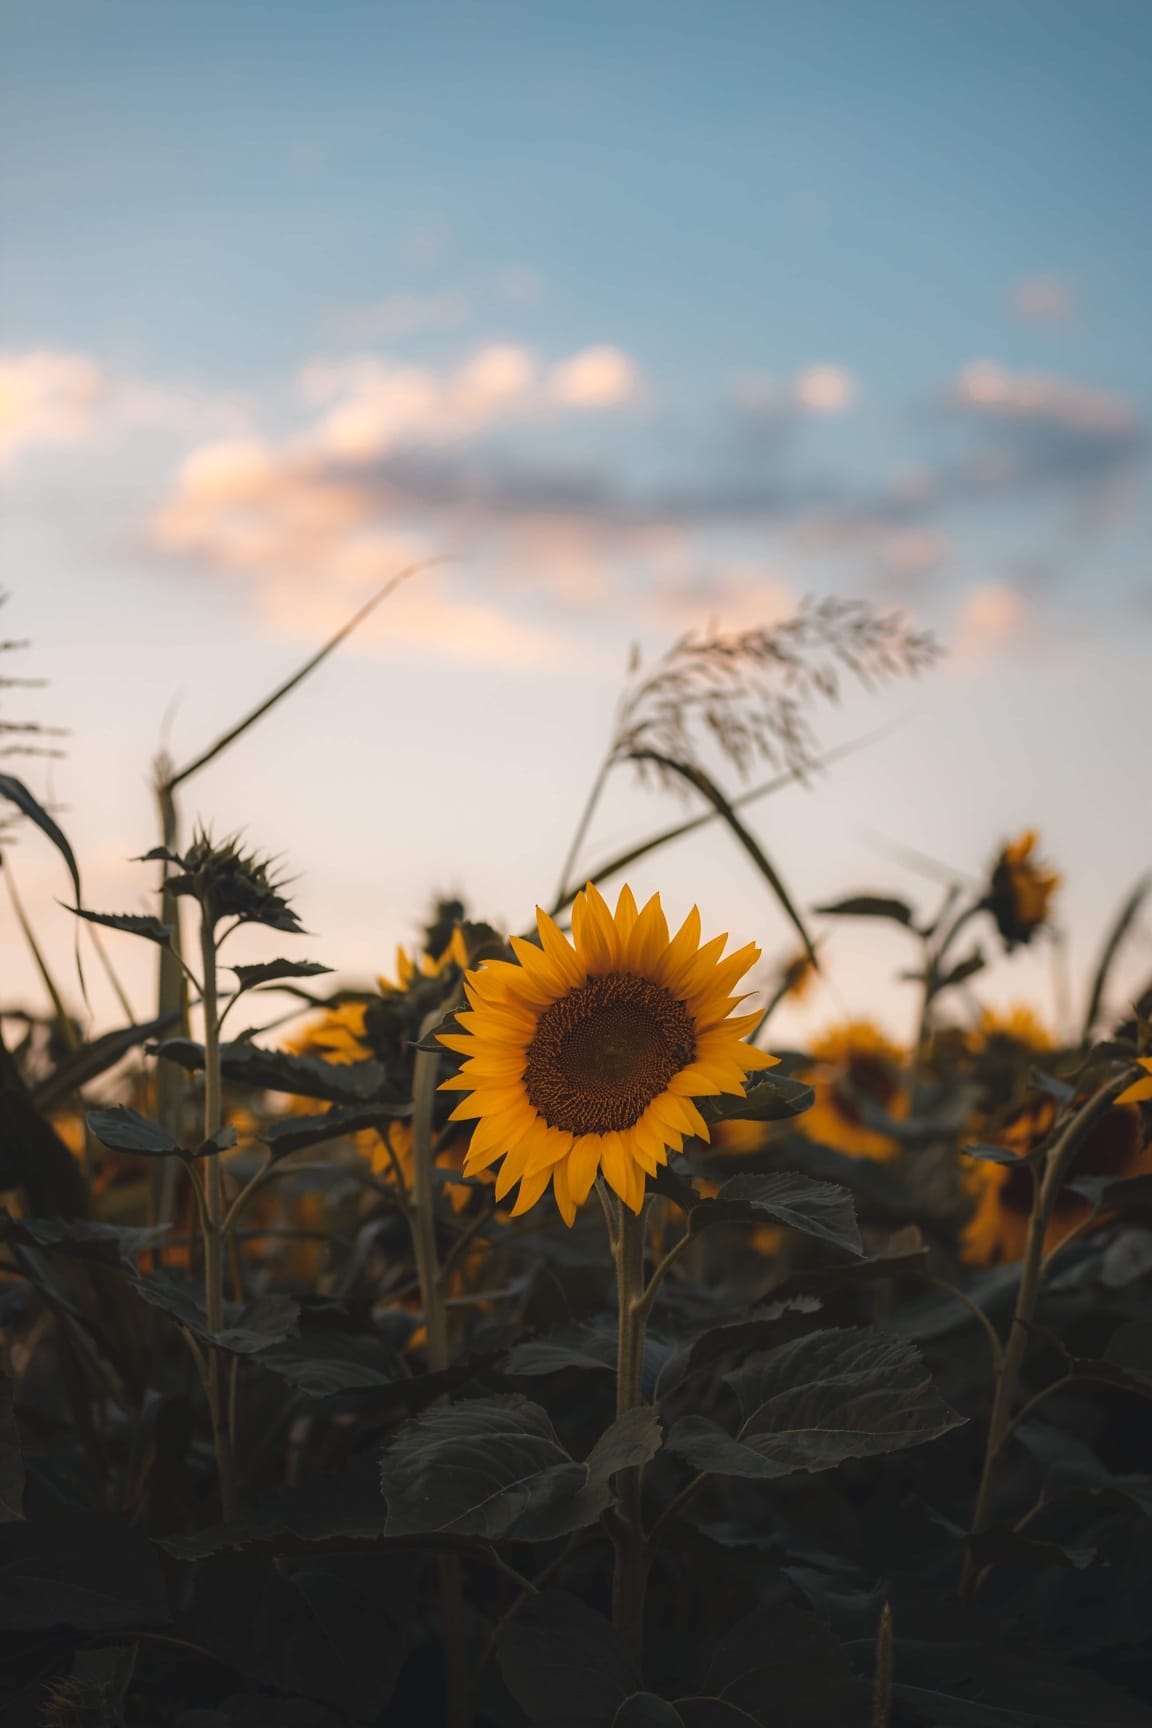 Free picture: sunflower, growing, dusk, flower, agriculture, nature ...